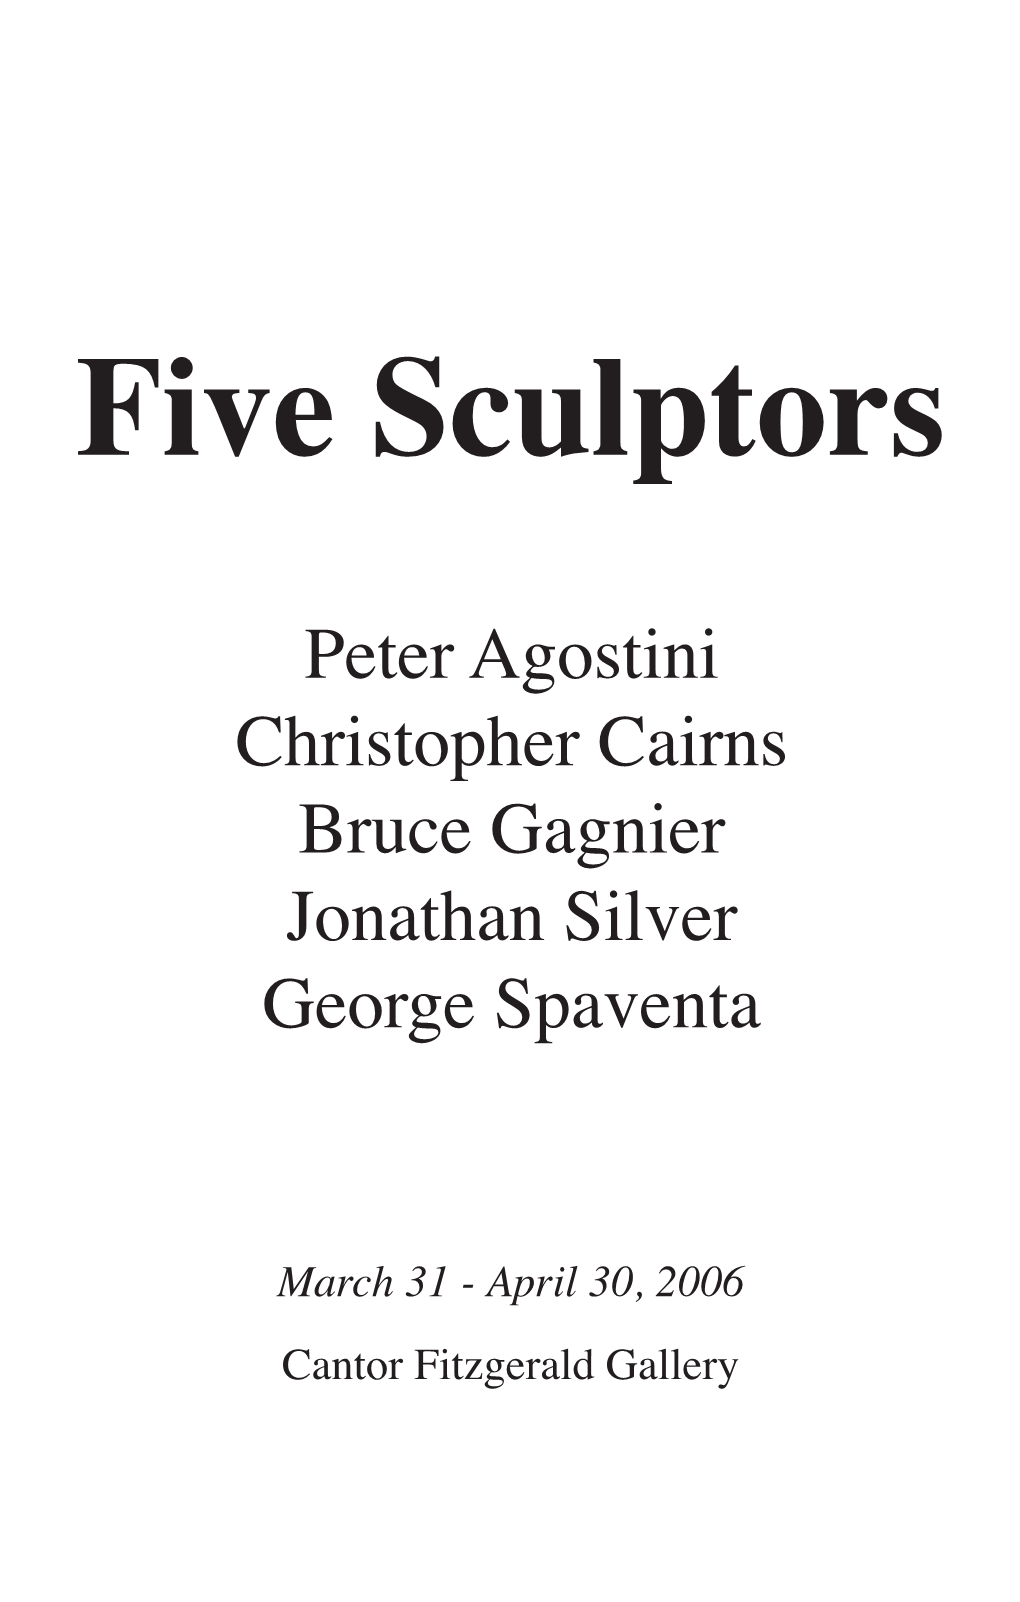 Peter Agostini Christopher Cairns Bruce Gagnier Jonathan Silver George Spaventa